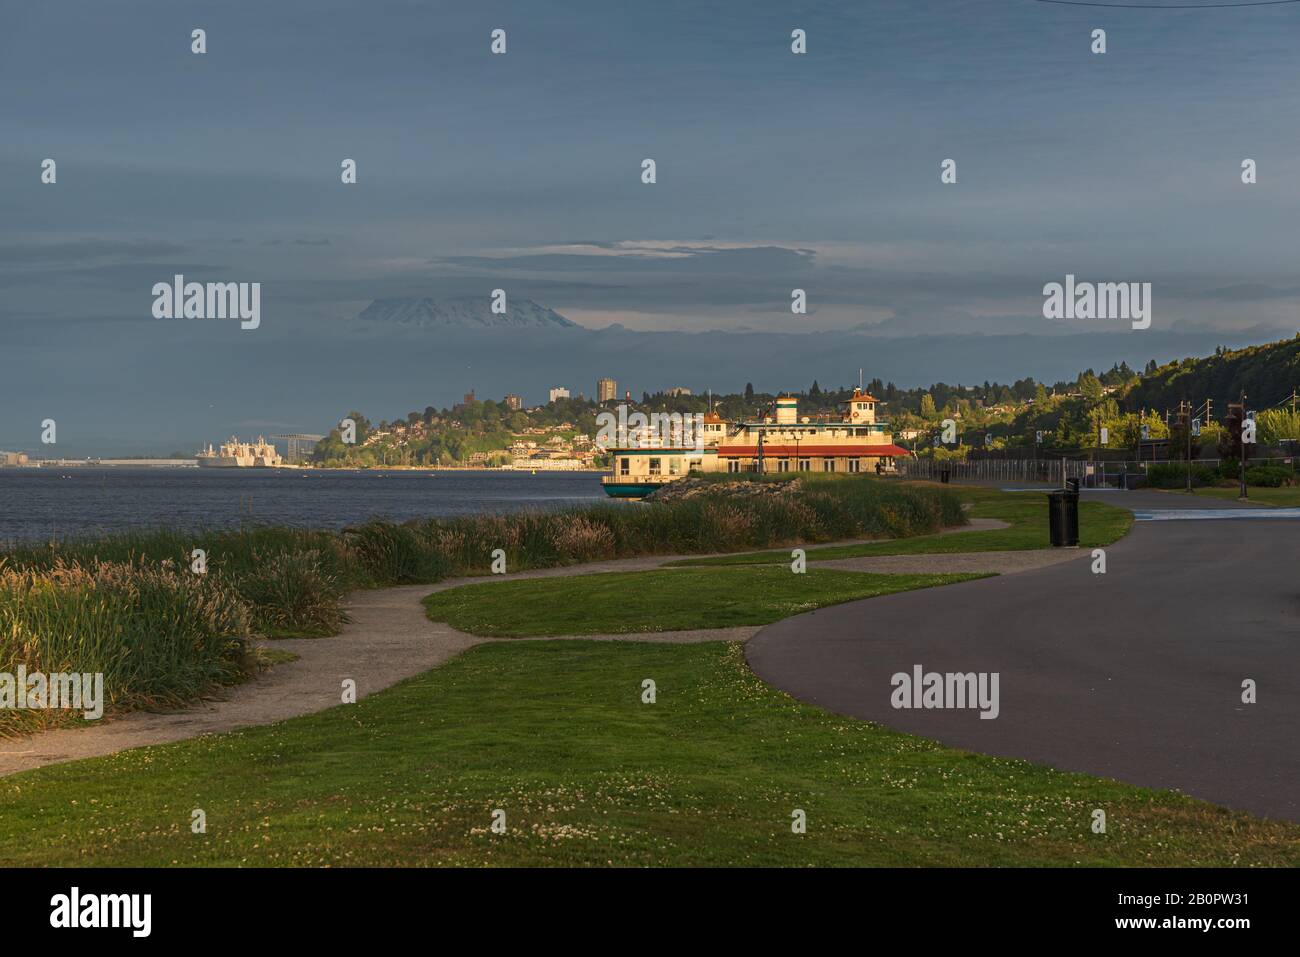 Mt Rainier Hovers Over Downtown Tacoma and Commencement Bay as Seen from Point Ruston with people walking and Riding Bikes Stock Photo